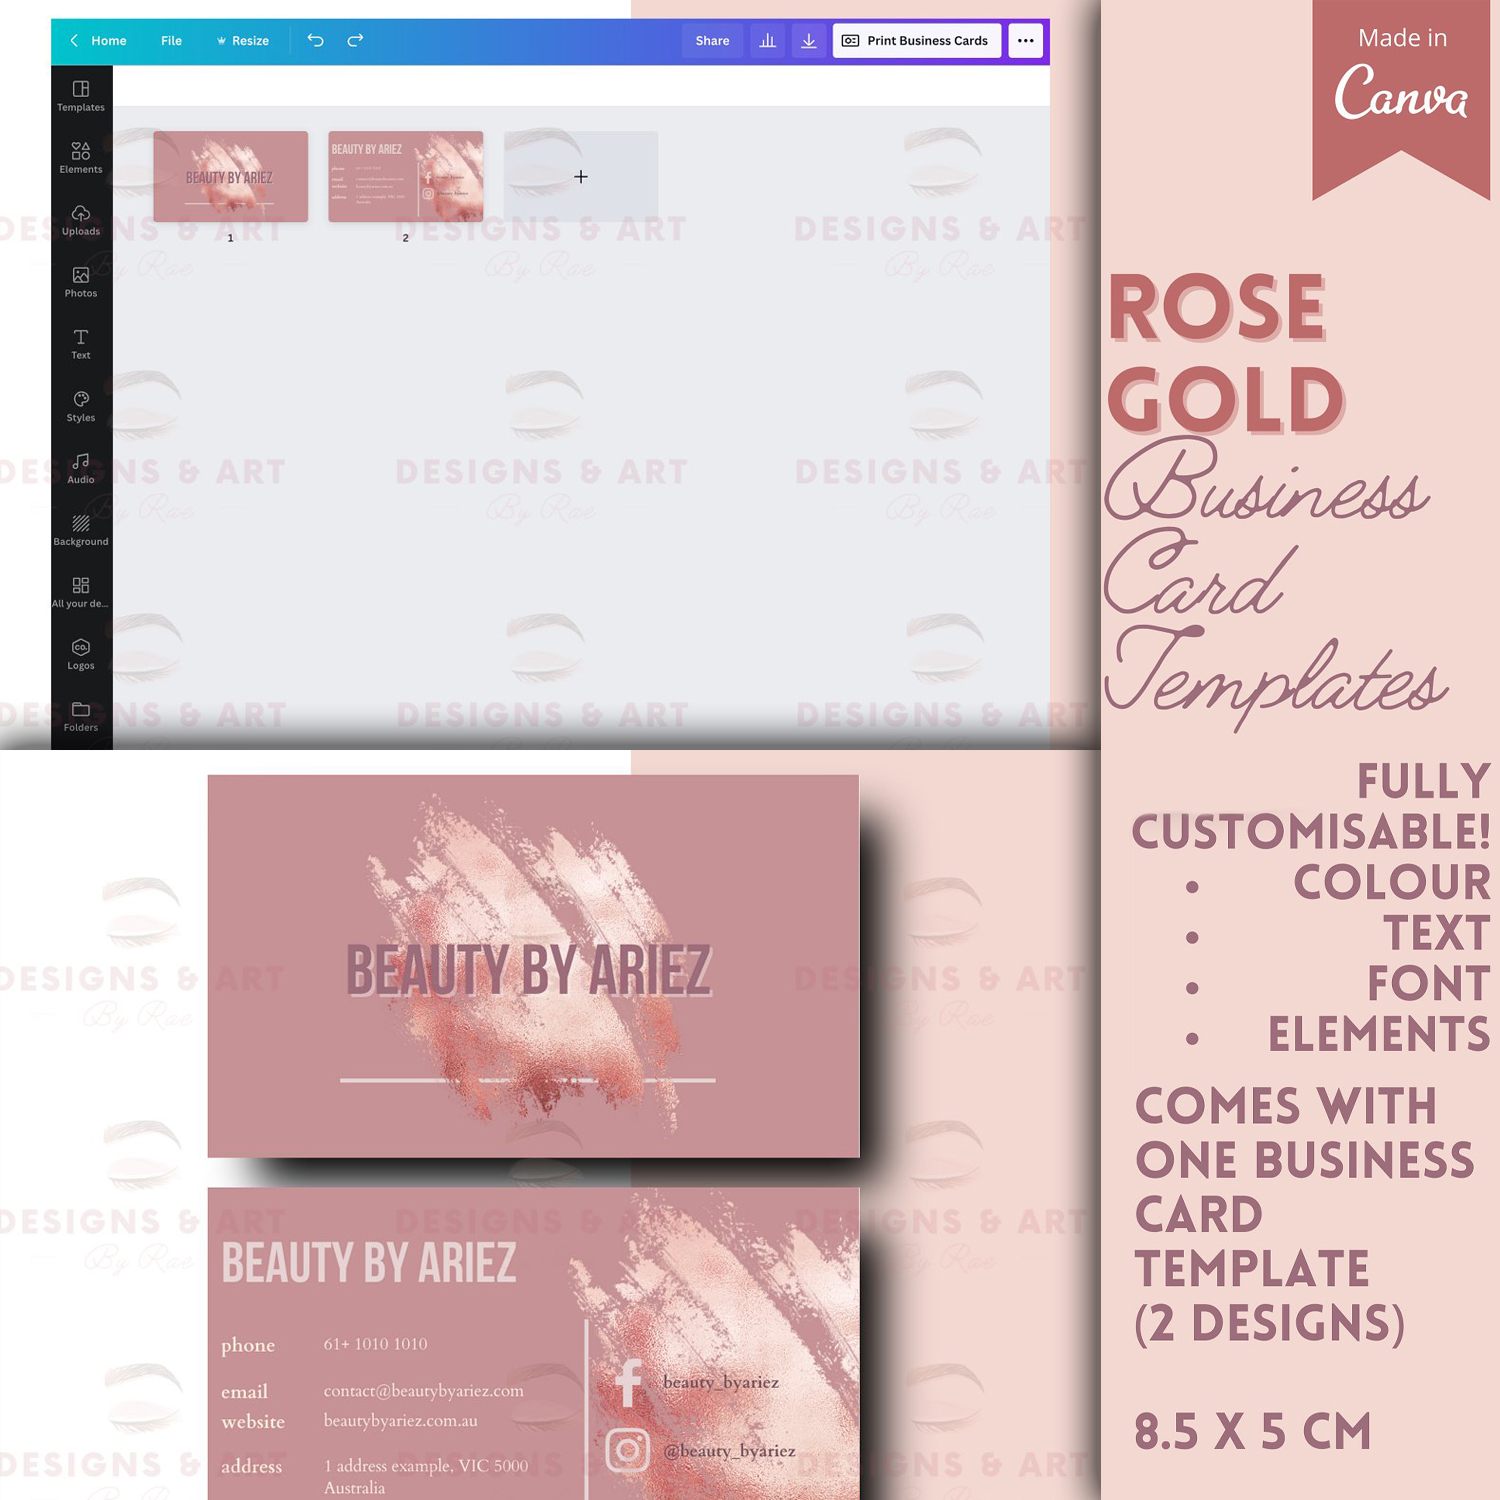 Prints of rose gold business card templates.